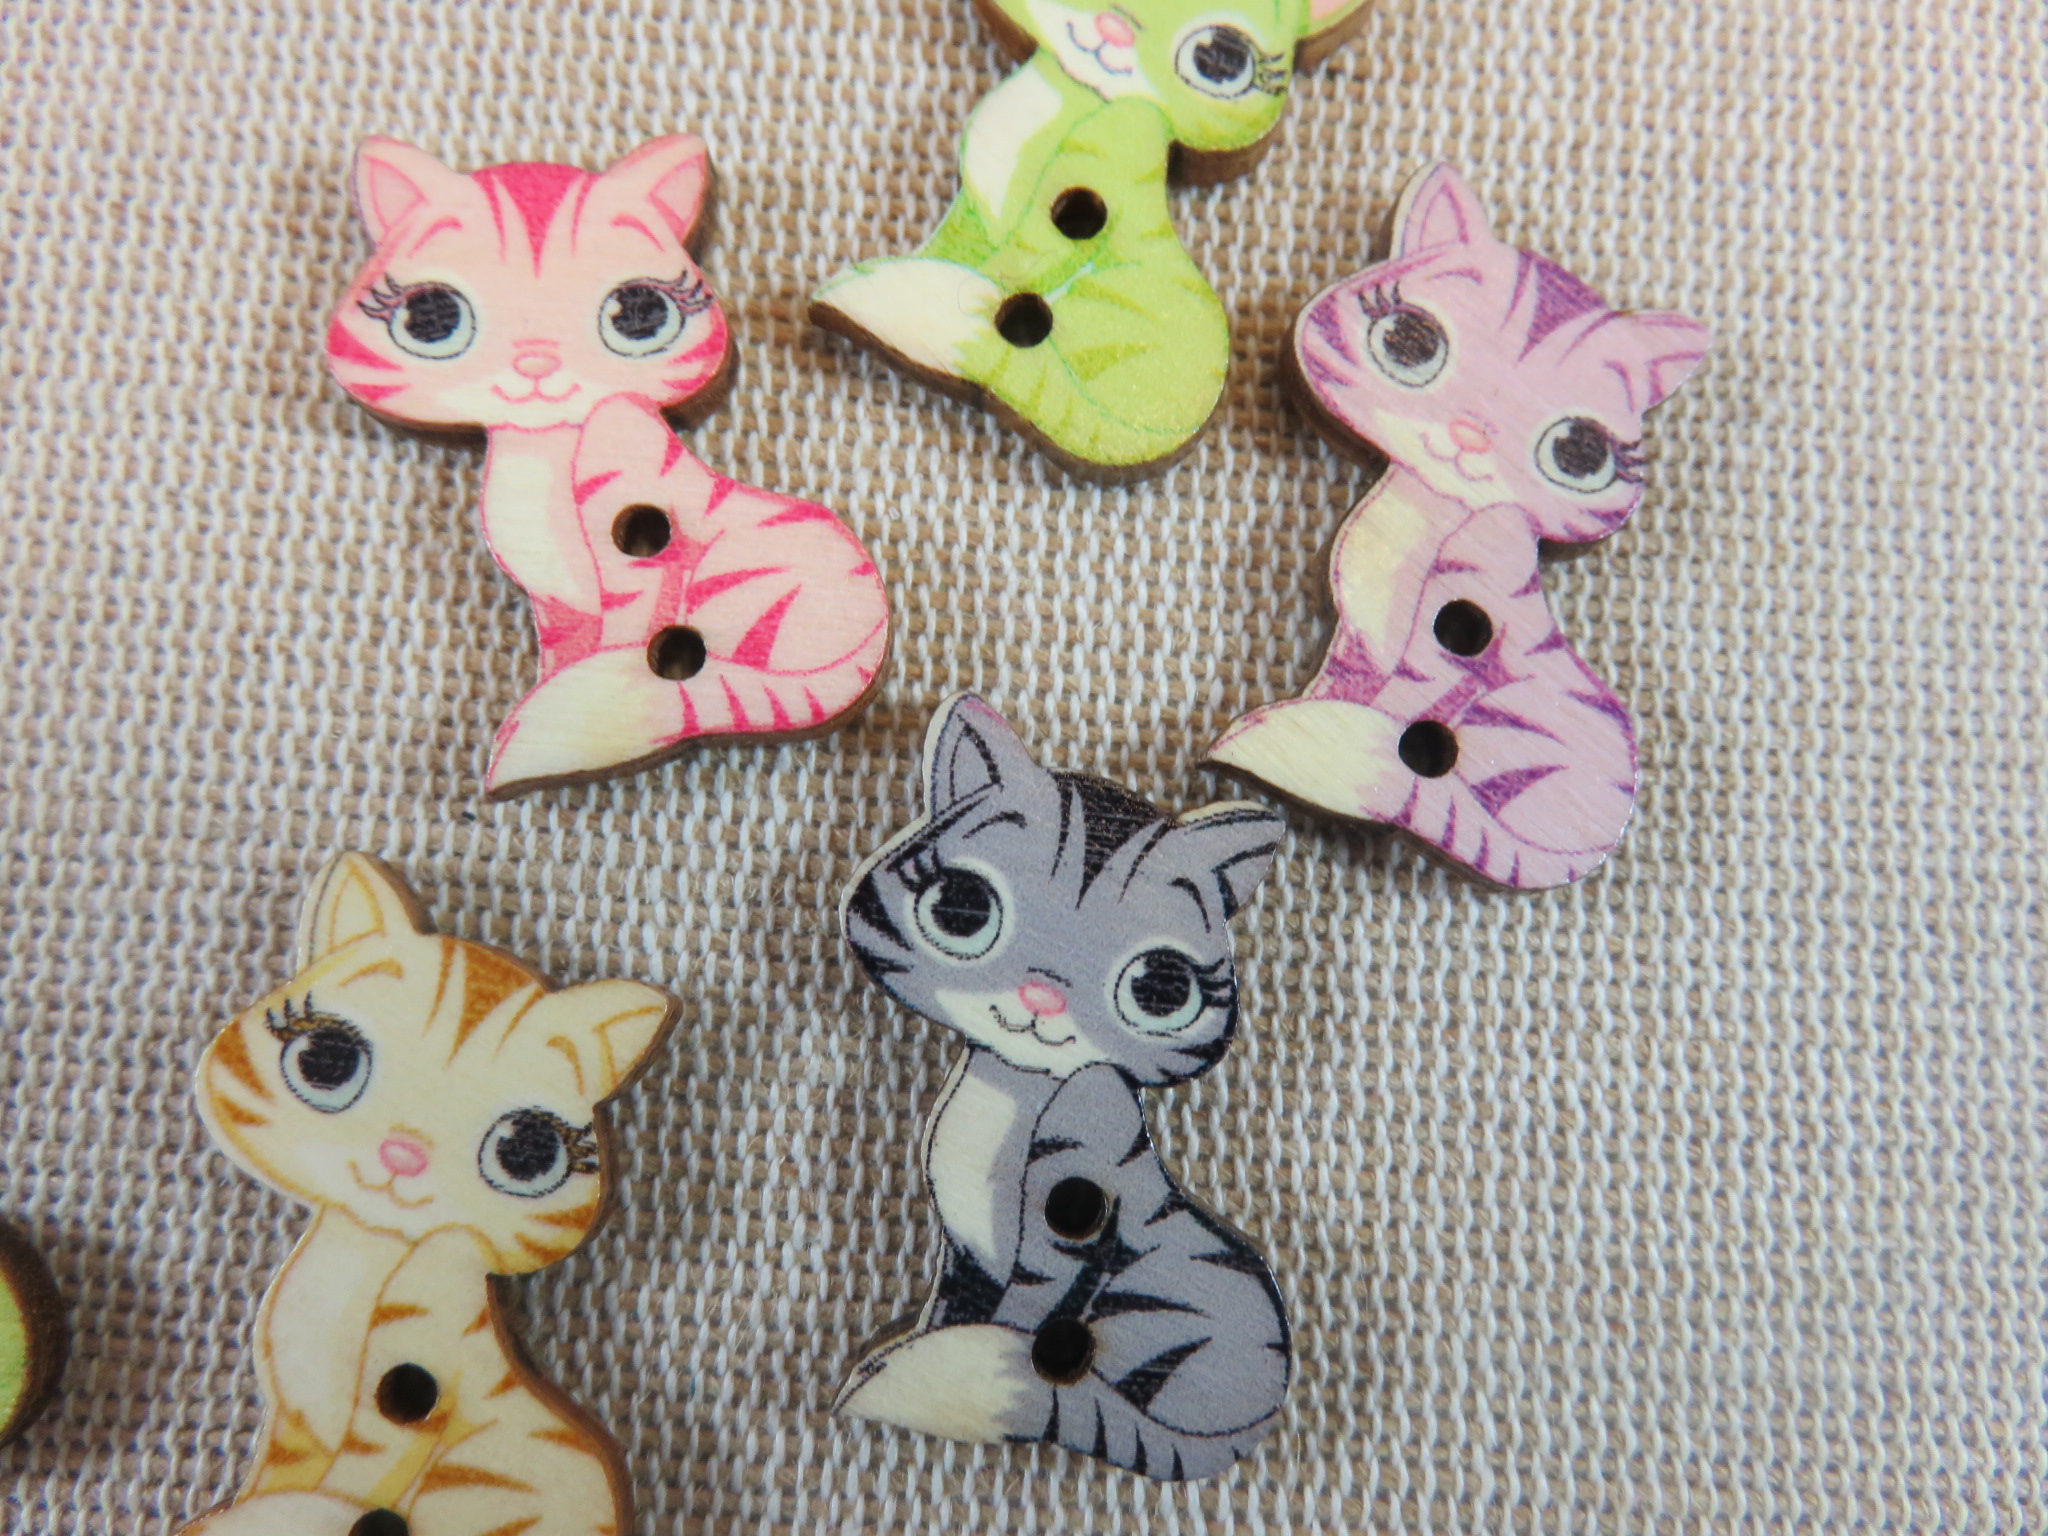 3 BOUTONS CHAT COUTURE MERCERIE Scrapbooking 